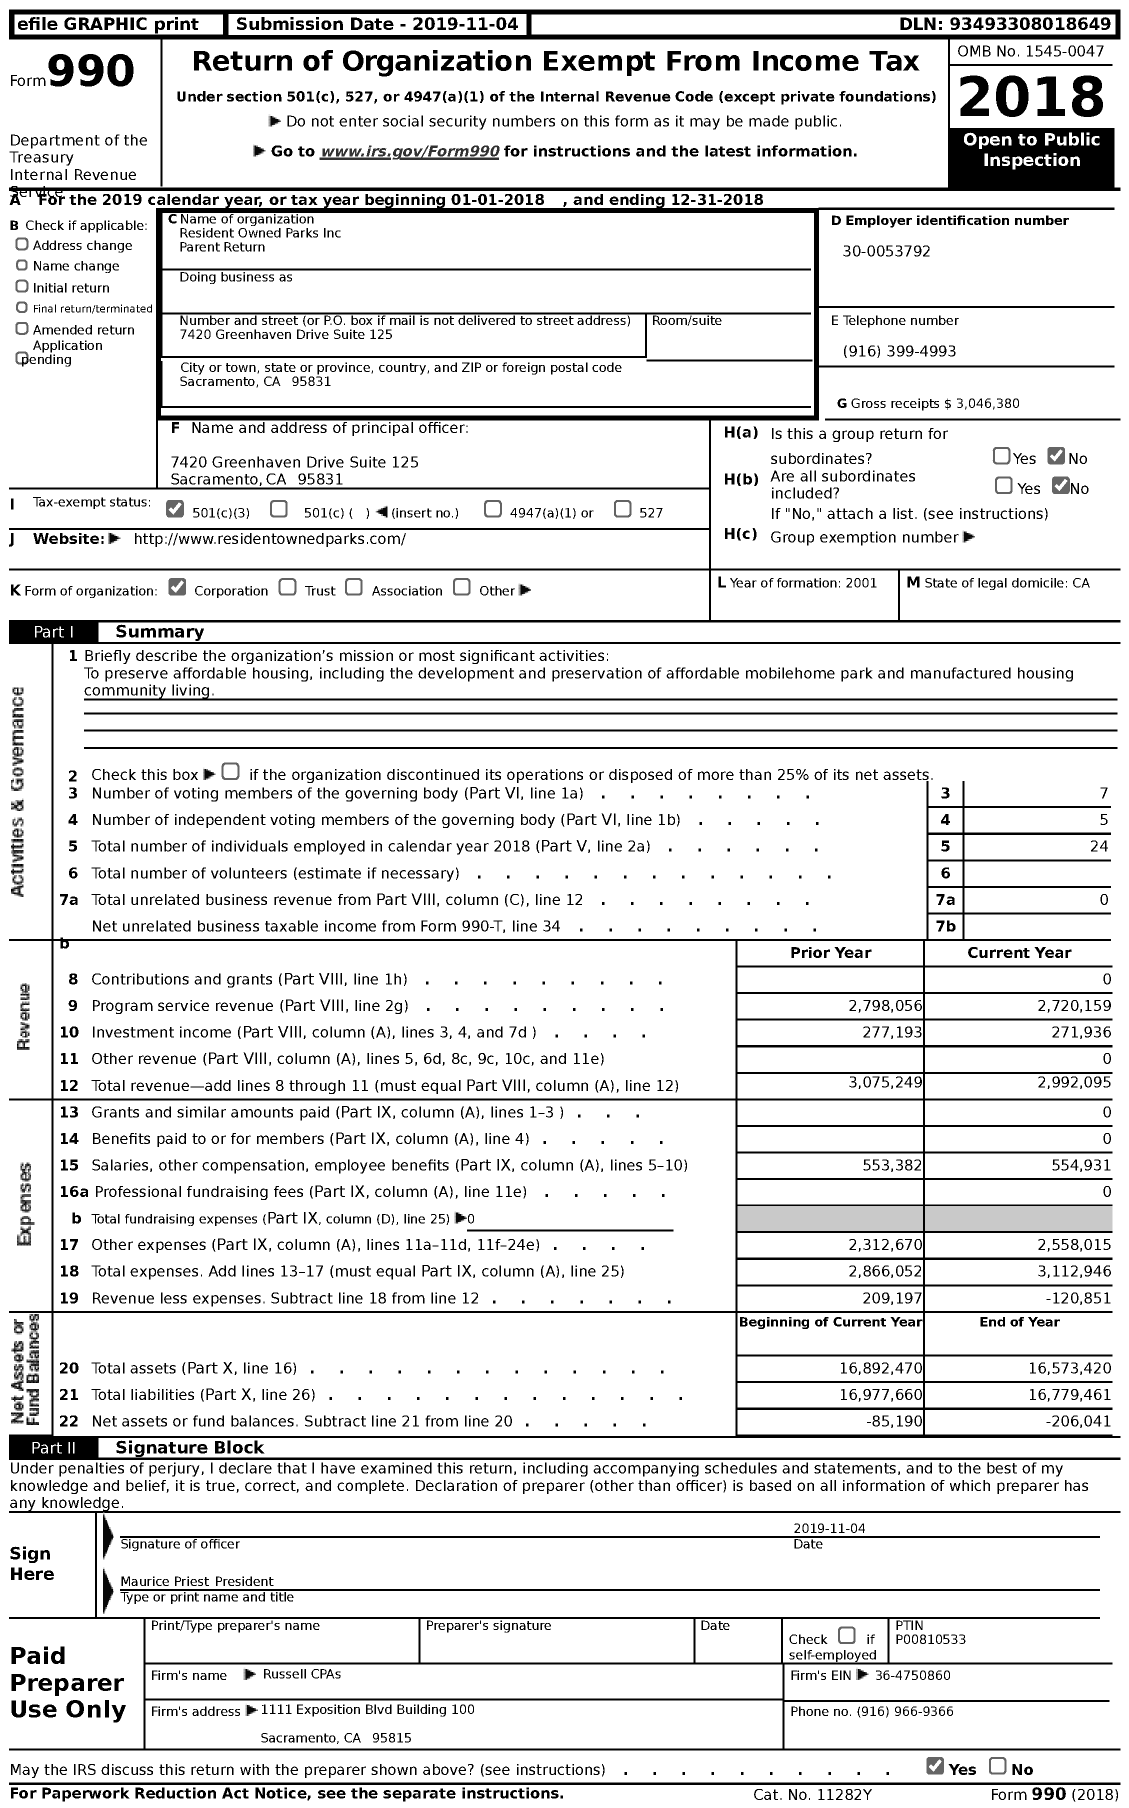 Image of first page of 2018 Form 990 for Resident Owned Parks Inc Parent Return (ROP)